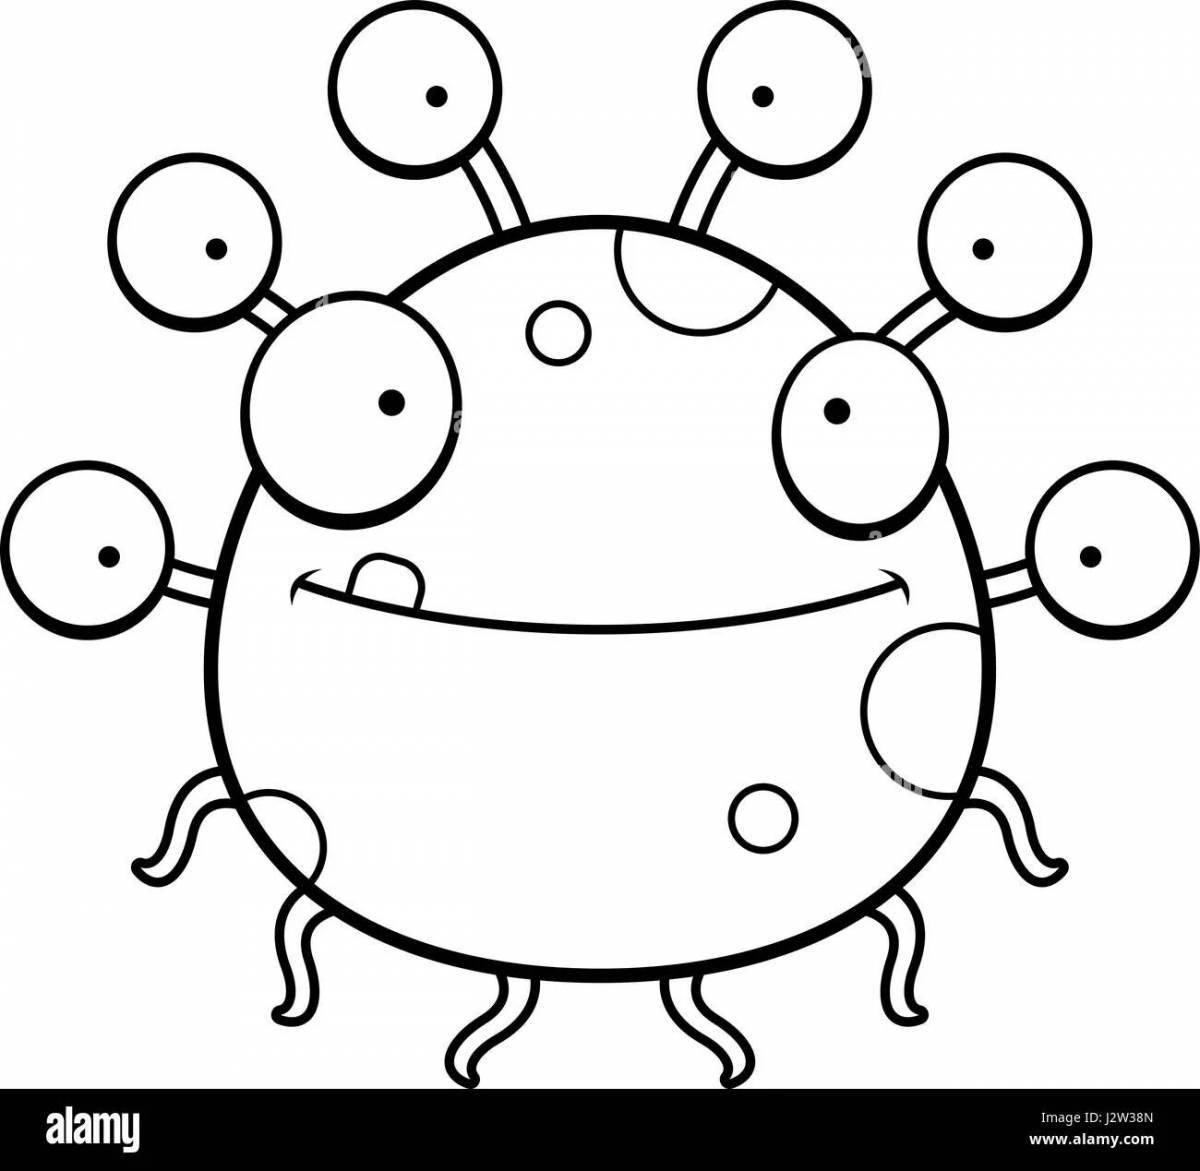 Creative microbes coloring pages for kids